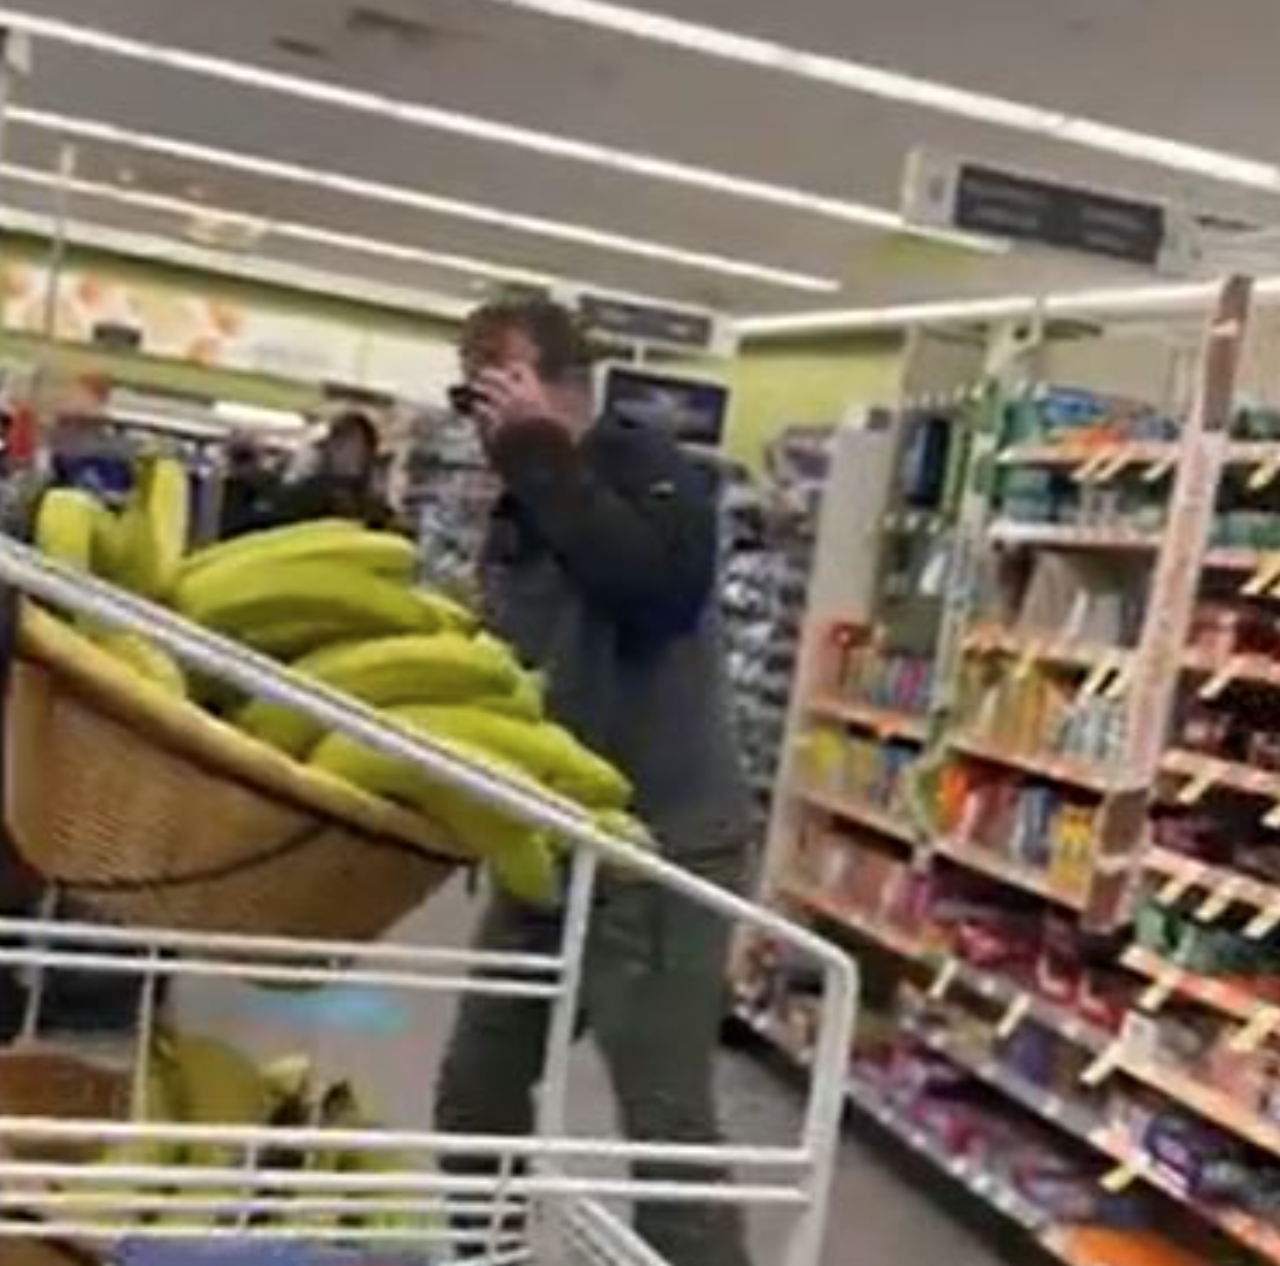 Meanwhile in California: Shoplifter Turns Bananas Into Hilarious Weapons During Drug Store Robbery (Video)